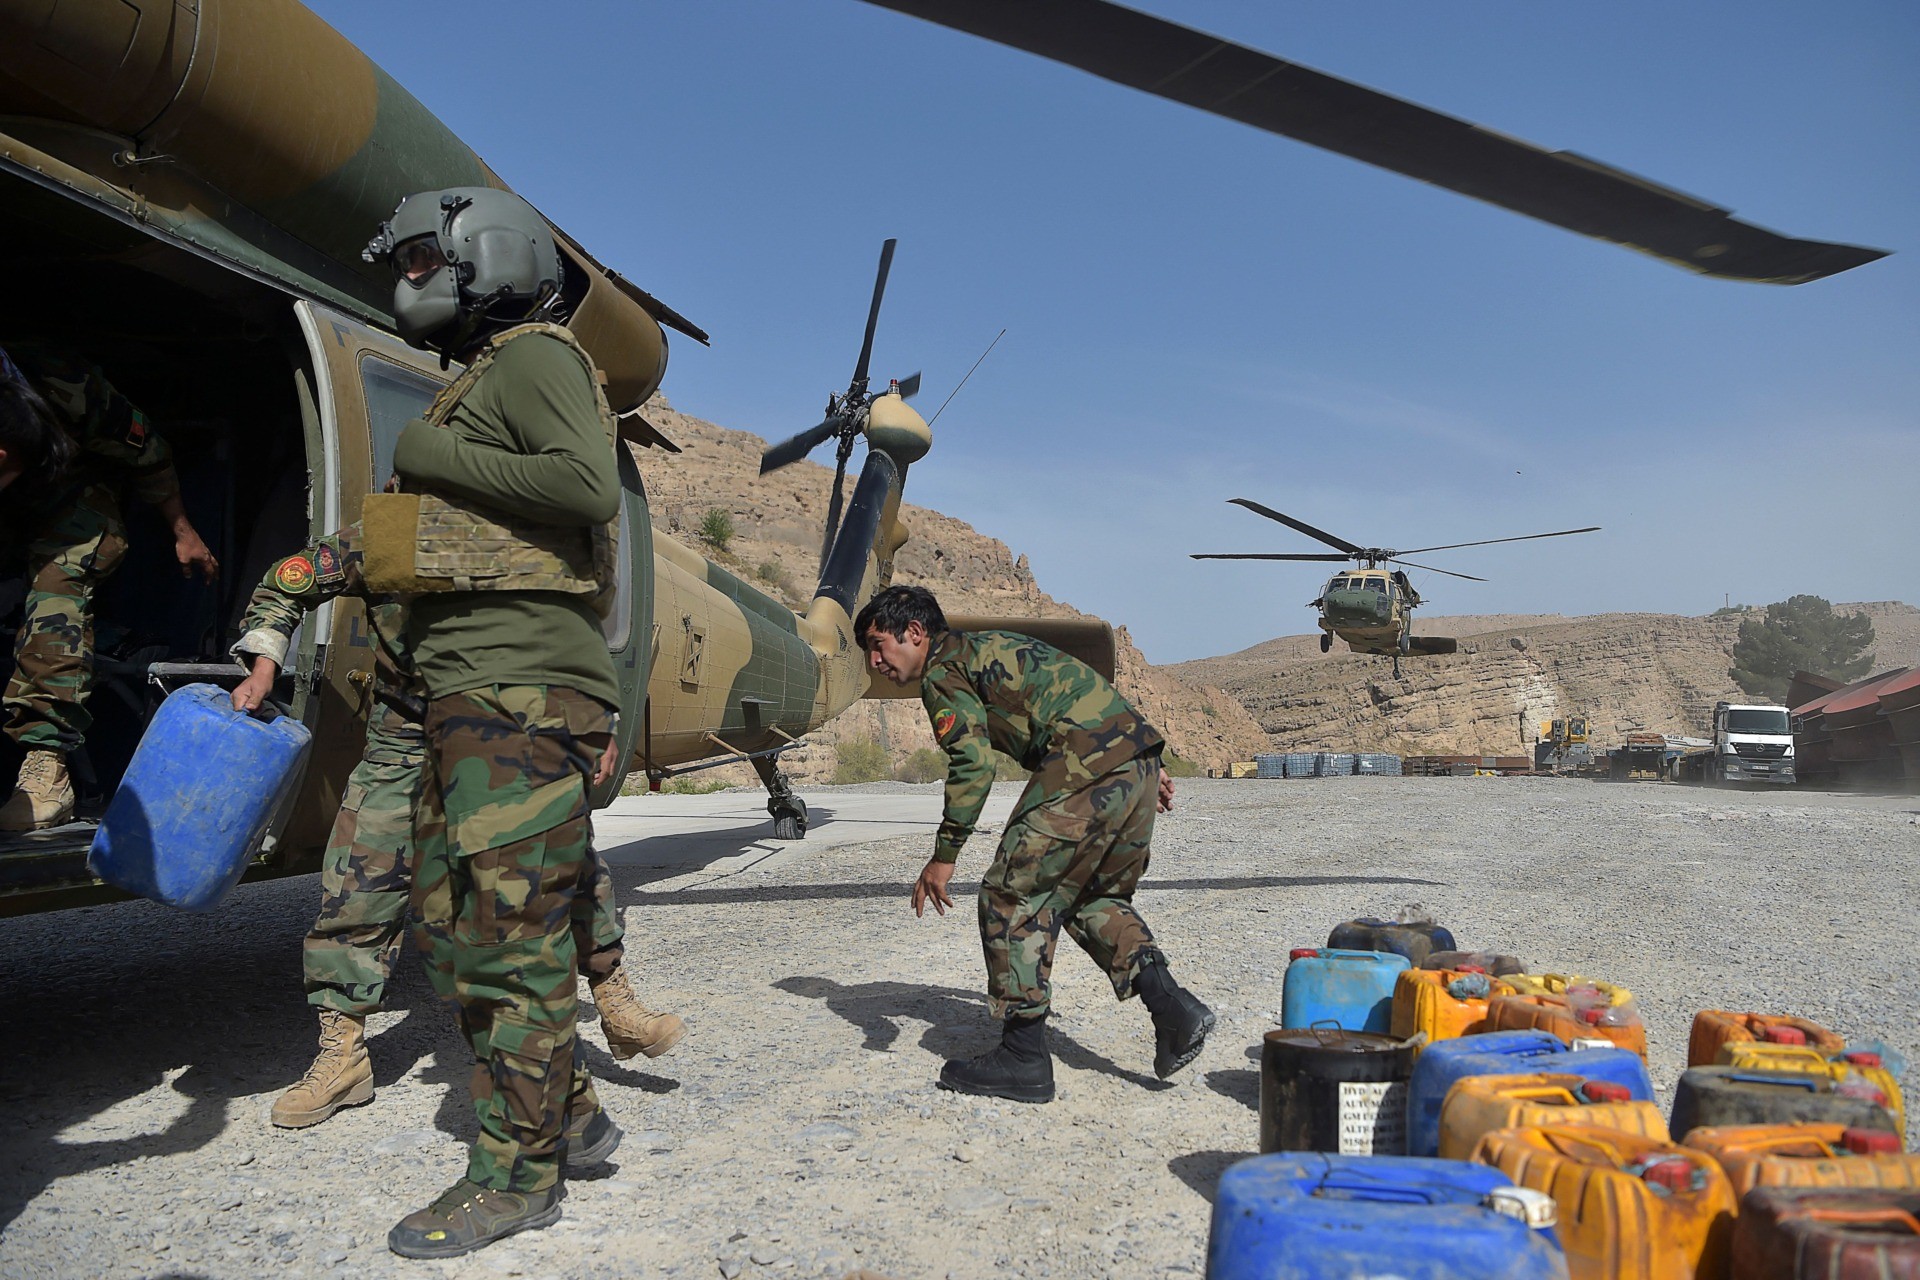 In this photograph taken on March 25, 2021, Afghan National Army (ANA) soldiers unload food items and petrol oil from an Afghan Air Force Black Hawk helicopter at the hydroelectric Kajaki Dam in Kajaki, northeast of Helmand Province. - In the heart of territory under siege from the Taliban, one of Afghanistan's most important hydroelectric dams is at the centre of a power struggle that symbolises the battle between the government and insurgents. - TO GO WITH Afghanistan-environment-dam-Taliban,FOCUS by Elise BLANCHARD (Photo by WAKIL KOHSAR / AFP) / TO GO WITH Afghanistan-environment-dam-Taliban,FOCUS by Elise BLANCHARD (Photo by WAKIL KOHSAR/AFP via Getty Images)